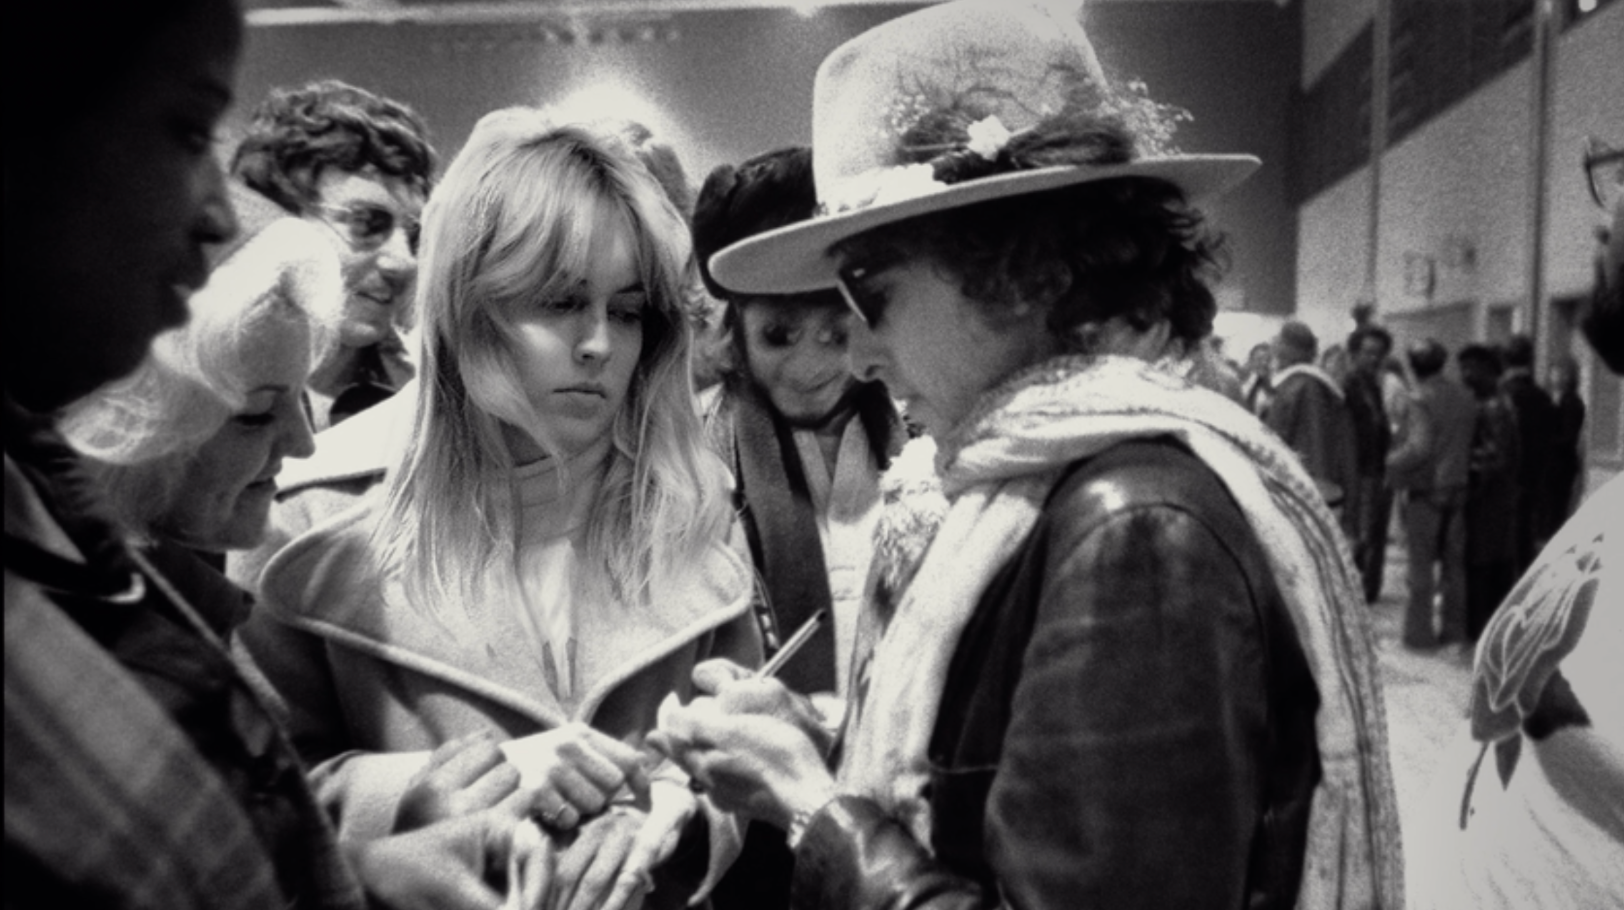 Bob Dylan wears a light hat and signs autographs for a young Sharon Stone